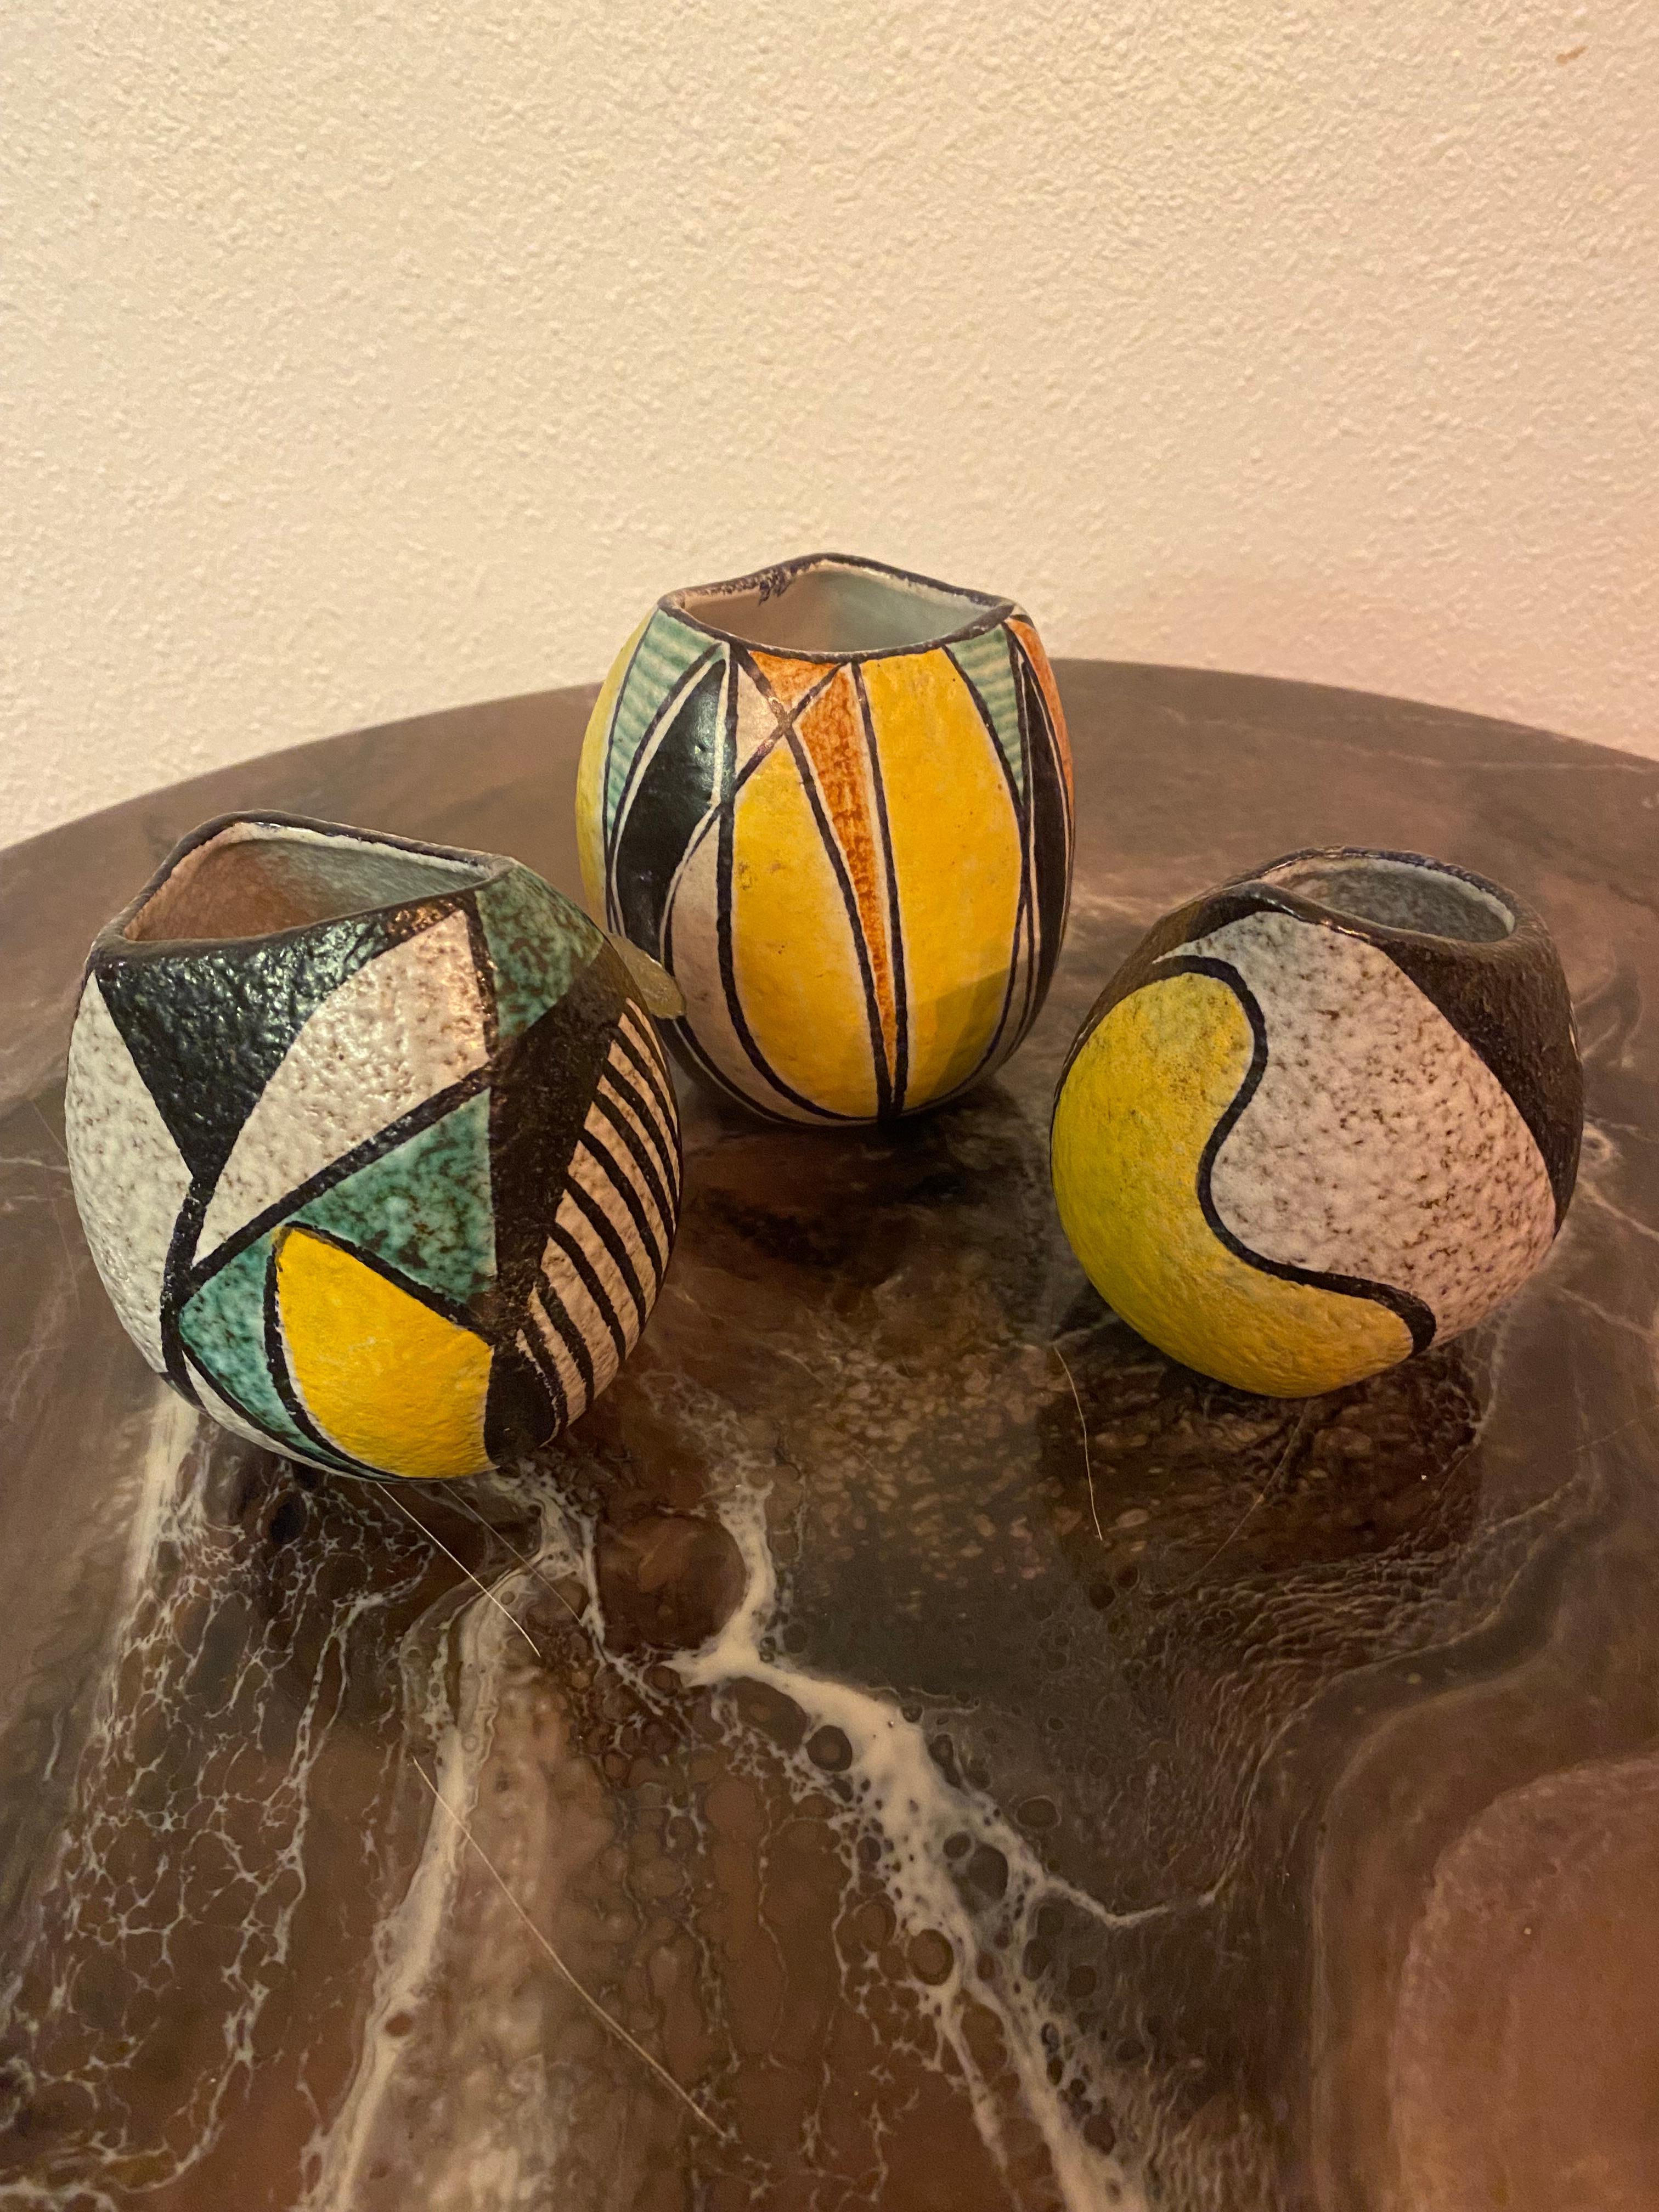 Just beautiful stylish tiny vases in matte glazing with geometric patterns in yellow, green, brown and black. Typical from the fifties/sixties

